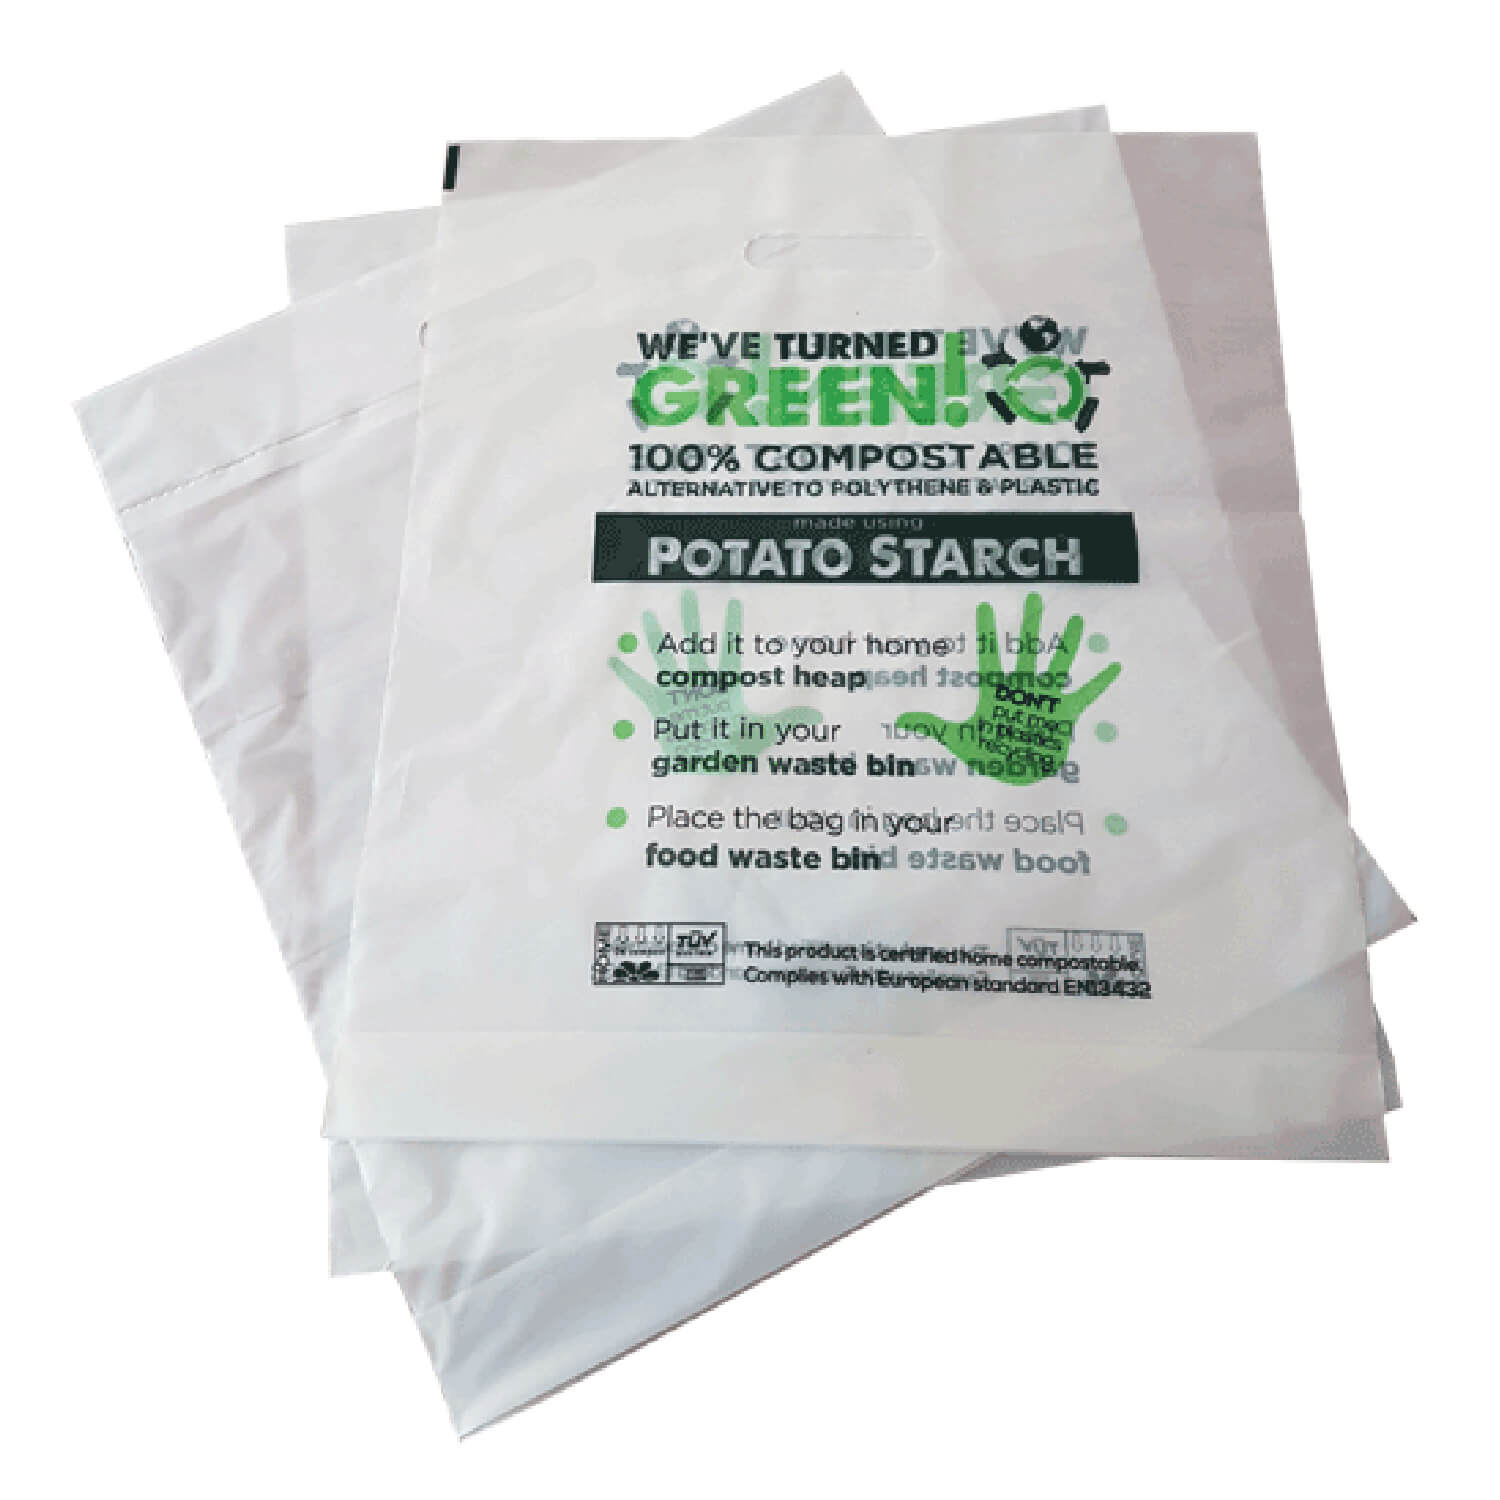 Green Manufacturing - Corn Starch Packaging - The ODM Group